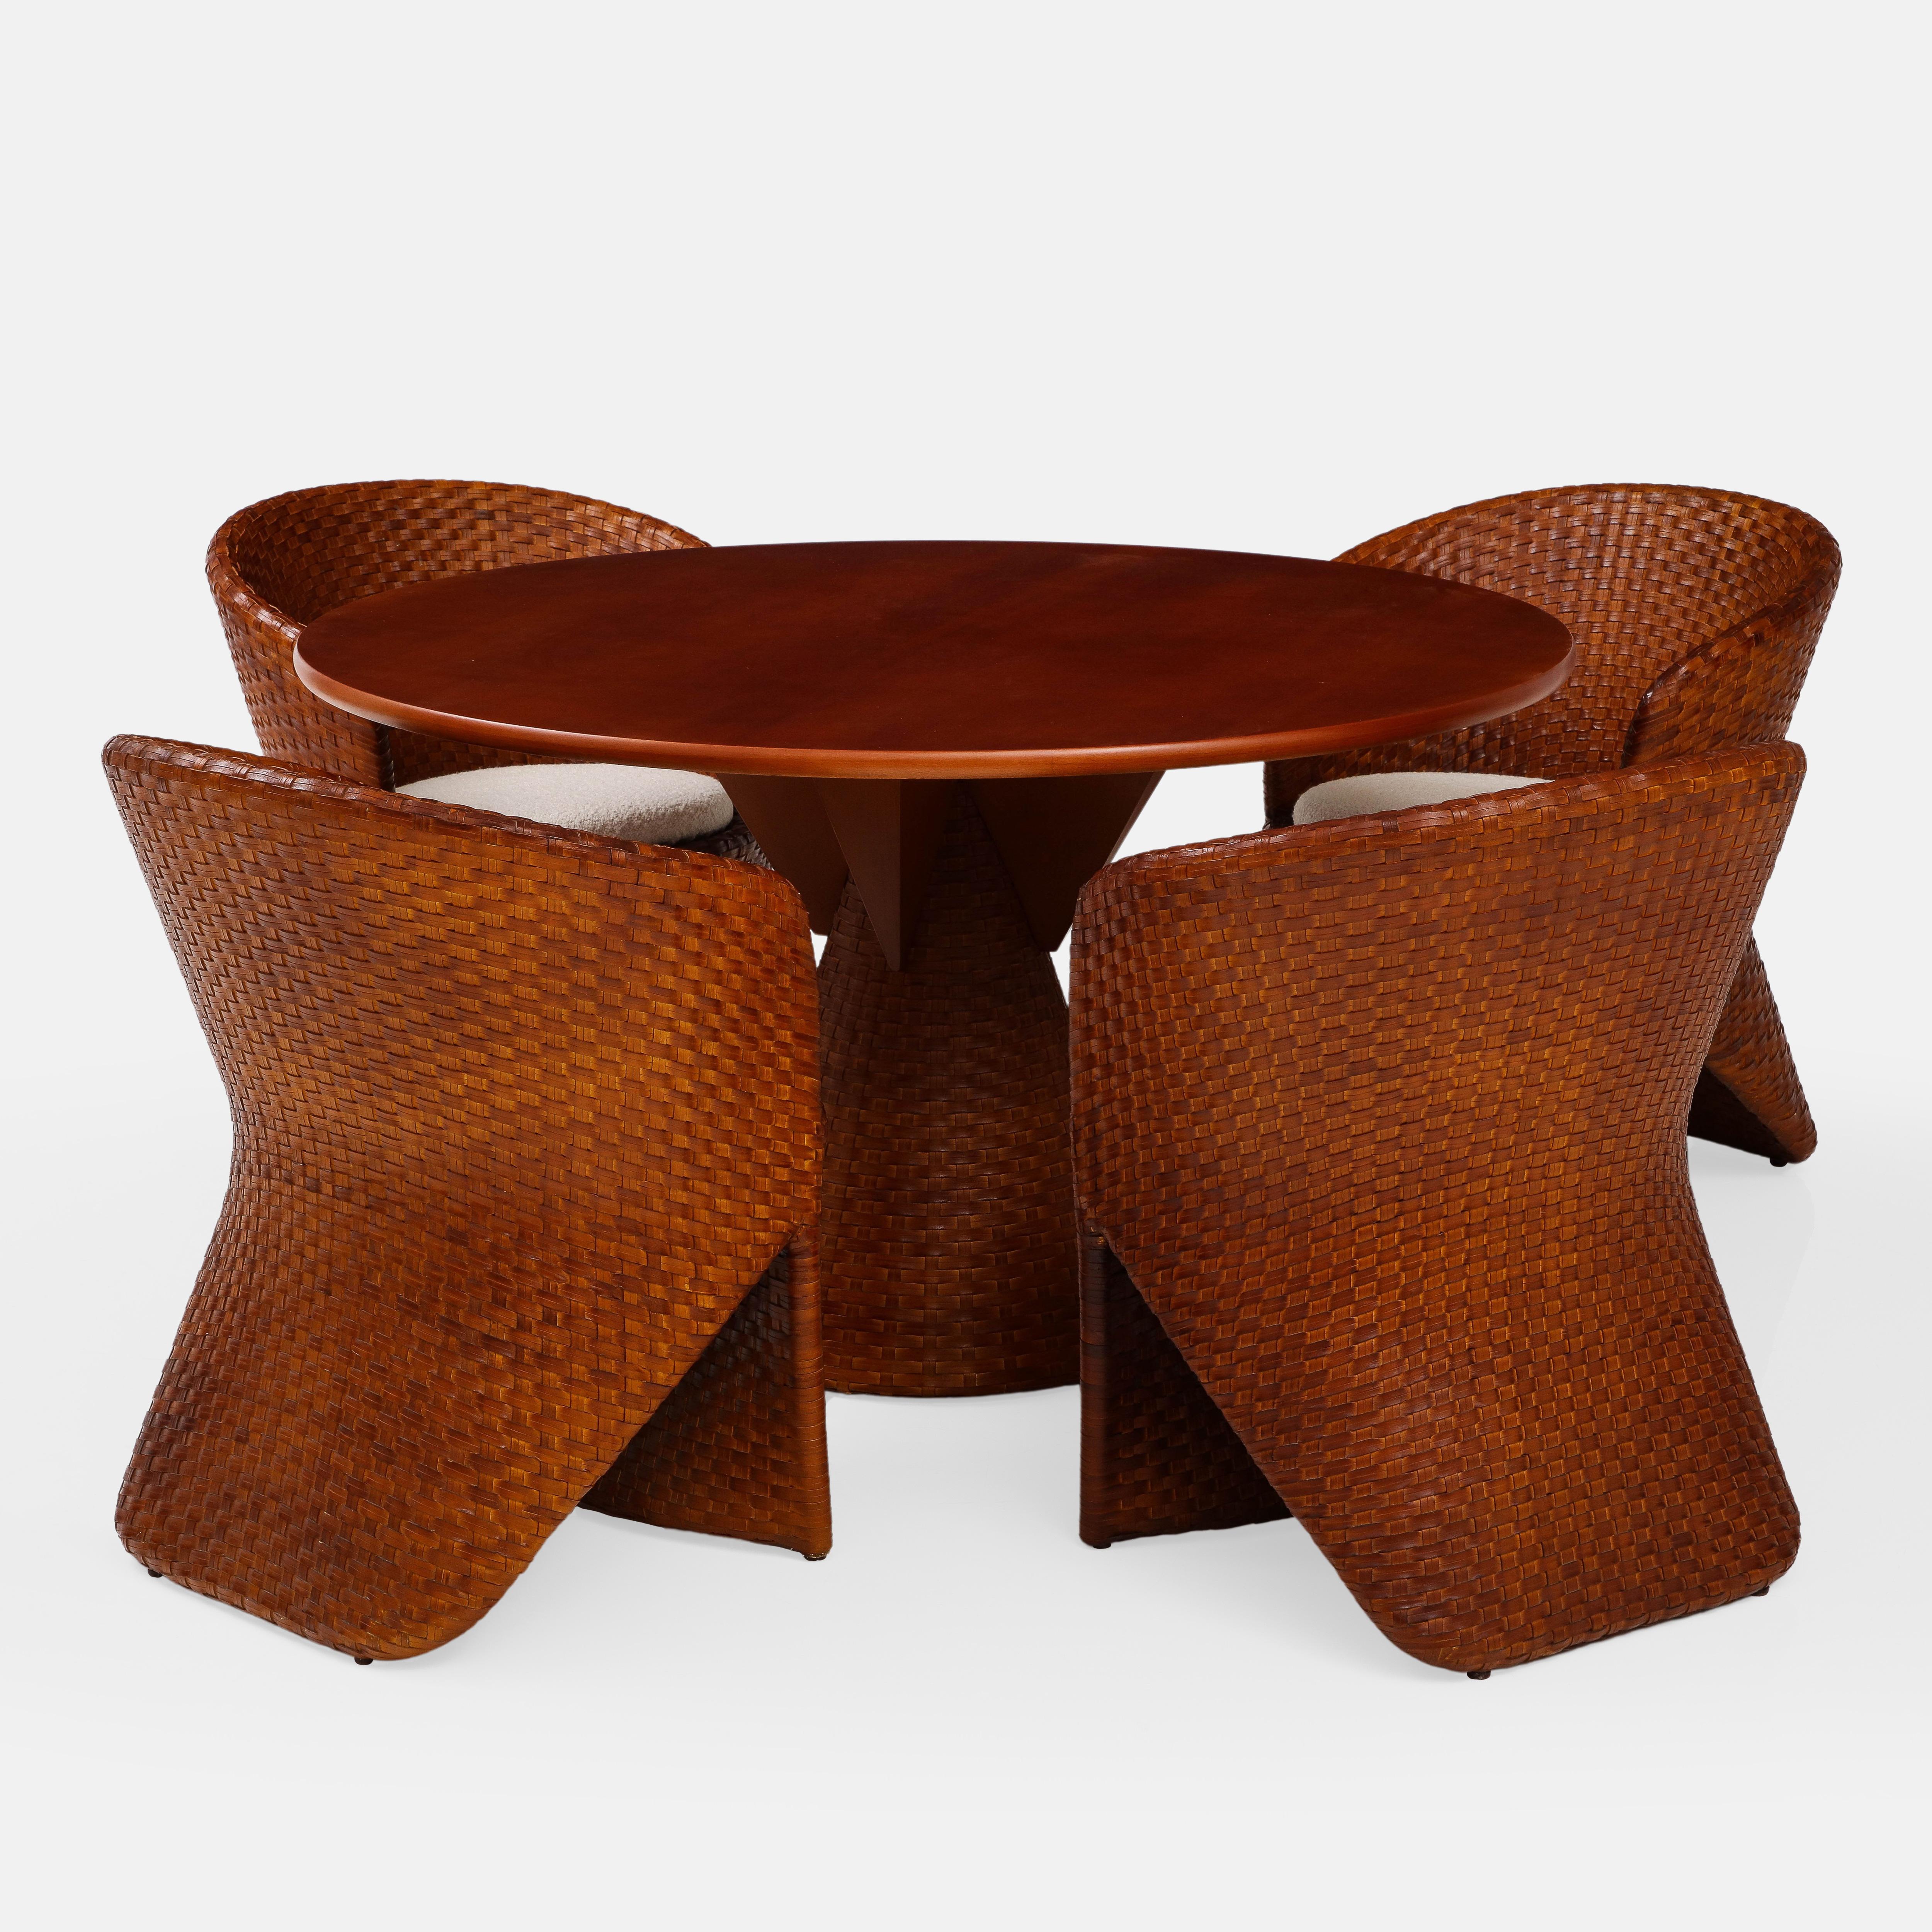 Mid-Century Modern Tito Agnoli for Bonacina Rare Carabou Dining Set in Rattan and Cherry Wood, 1991 For Sale